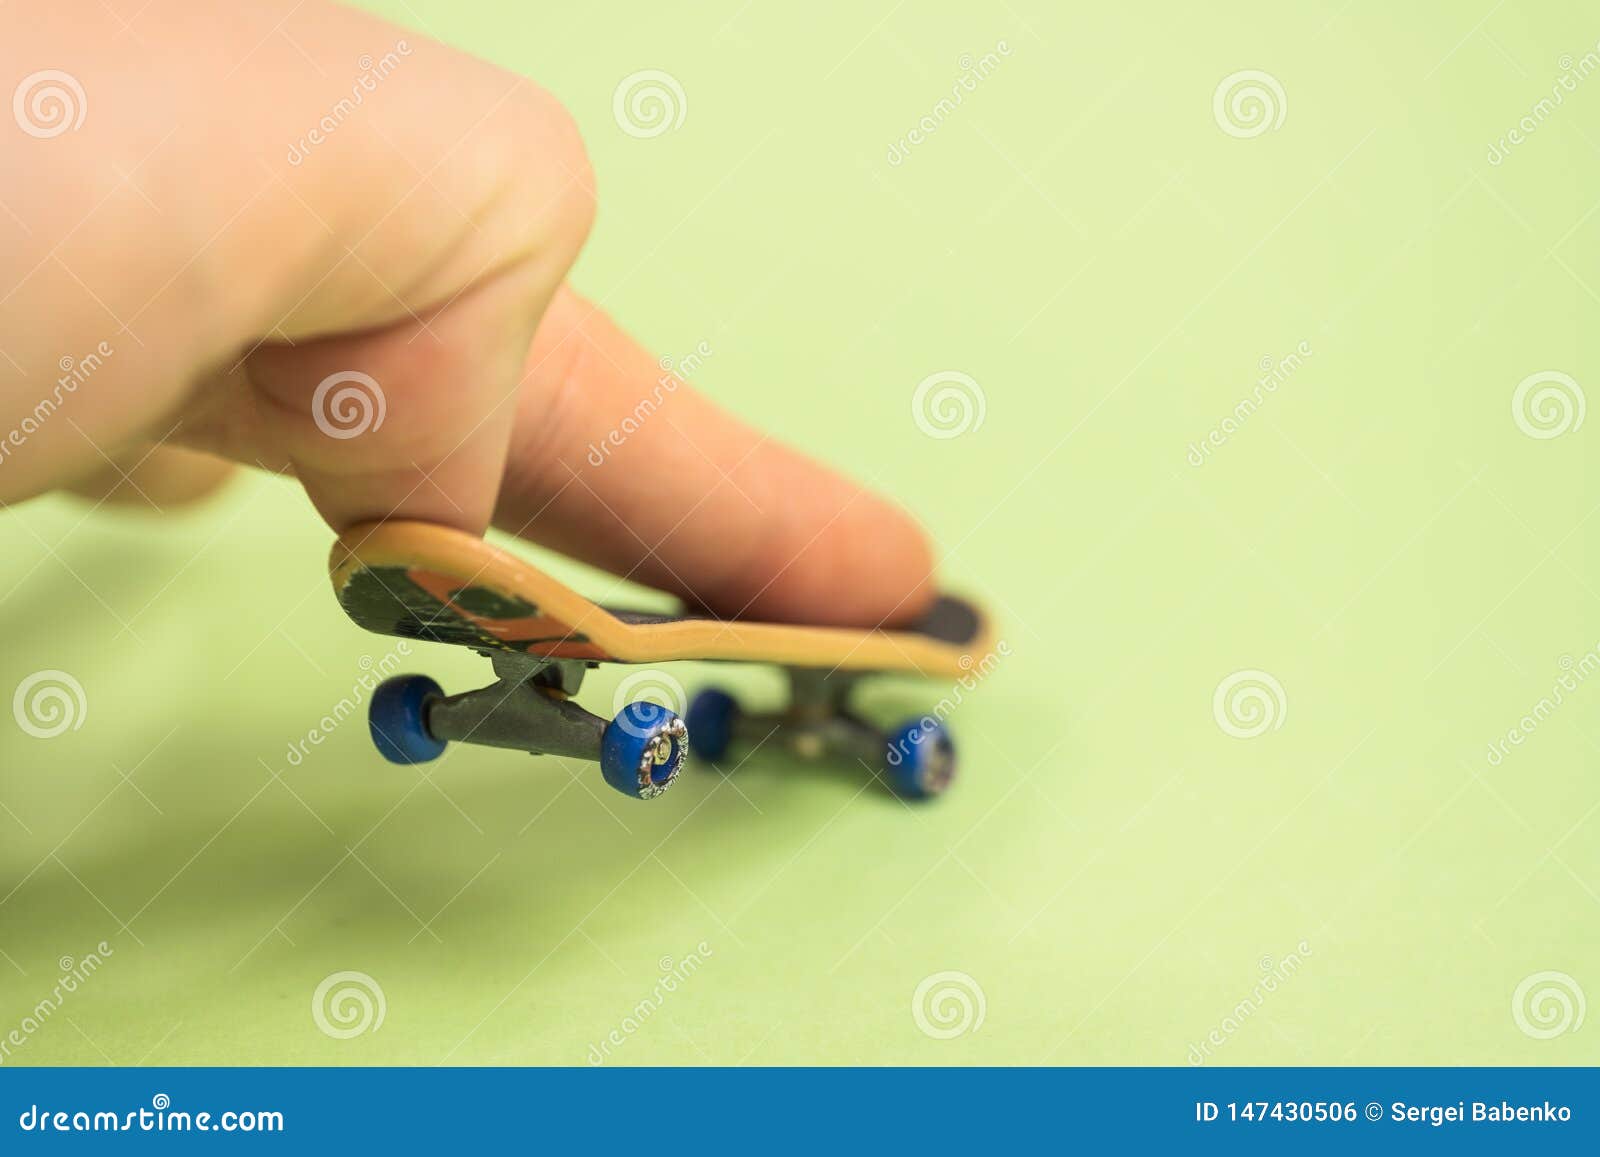 Fingerboard. Man Make Trick by Two Fingers with Small Skateboard on ...